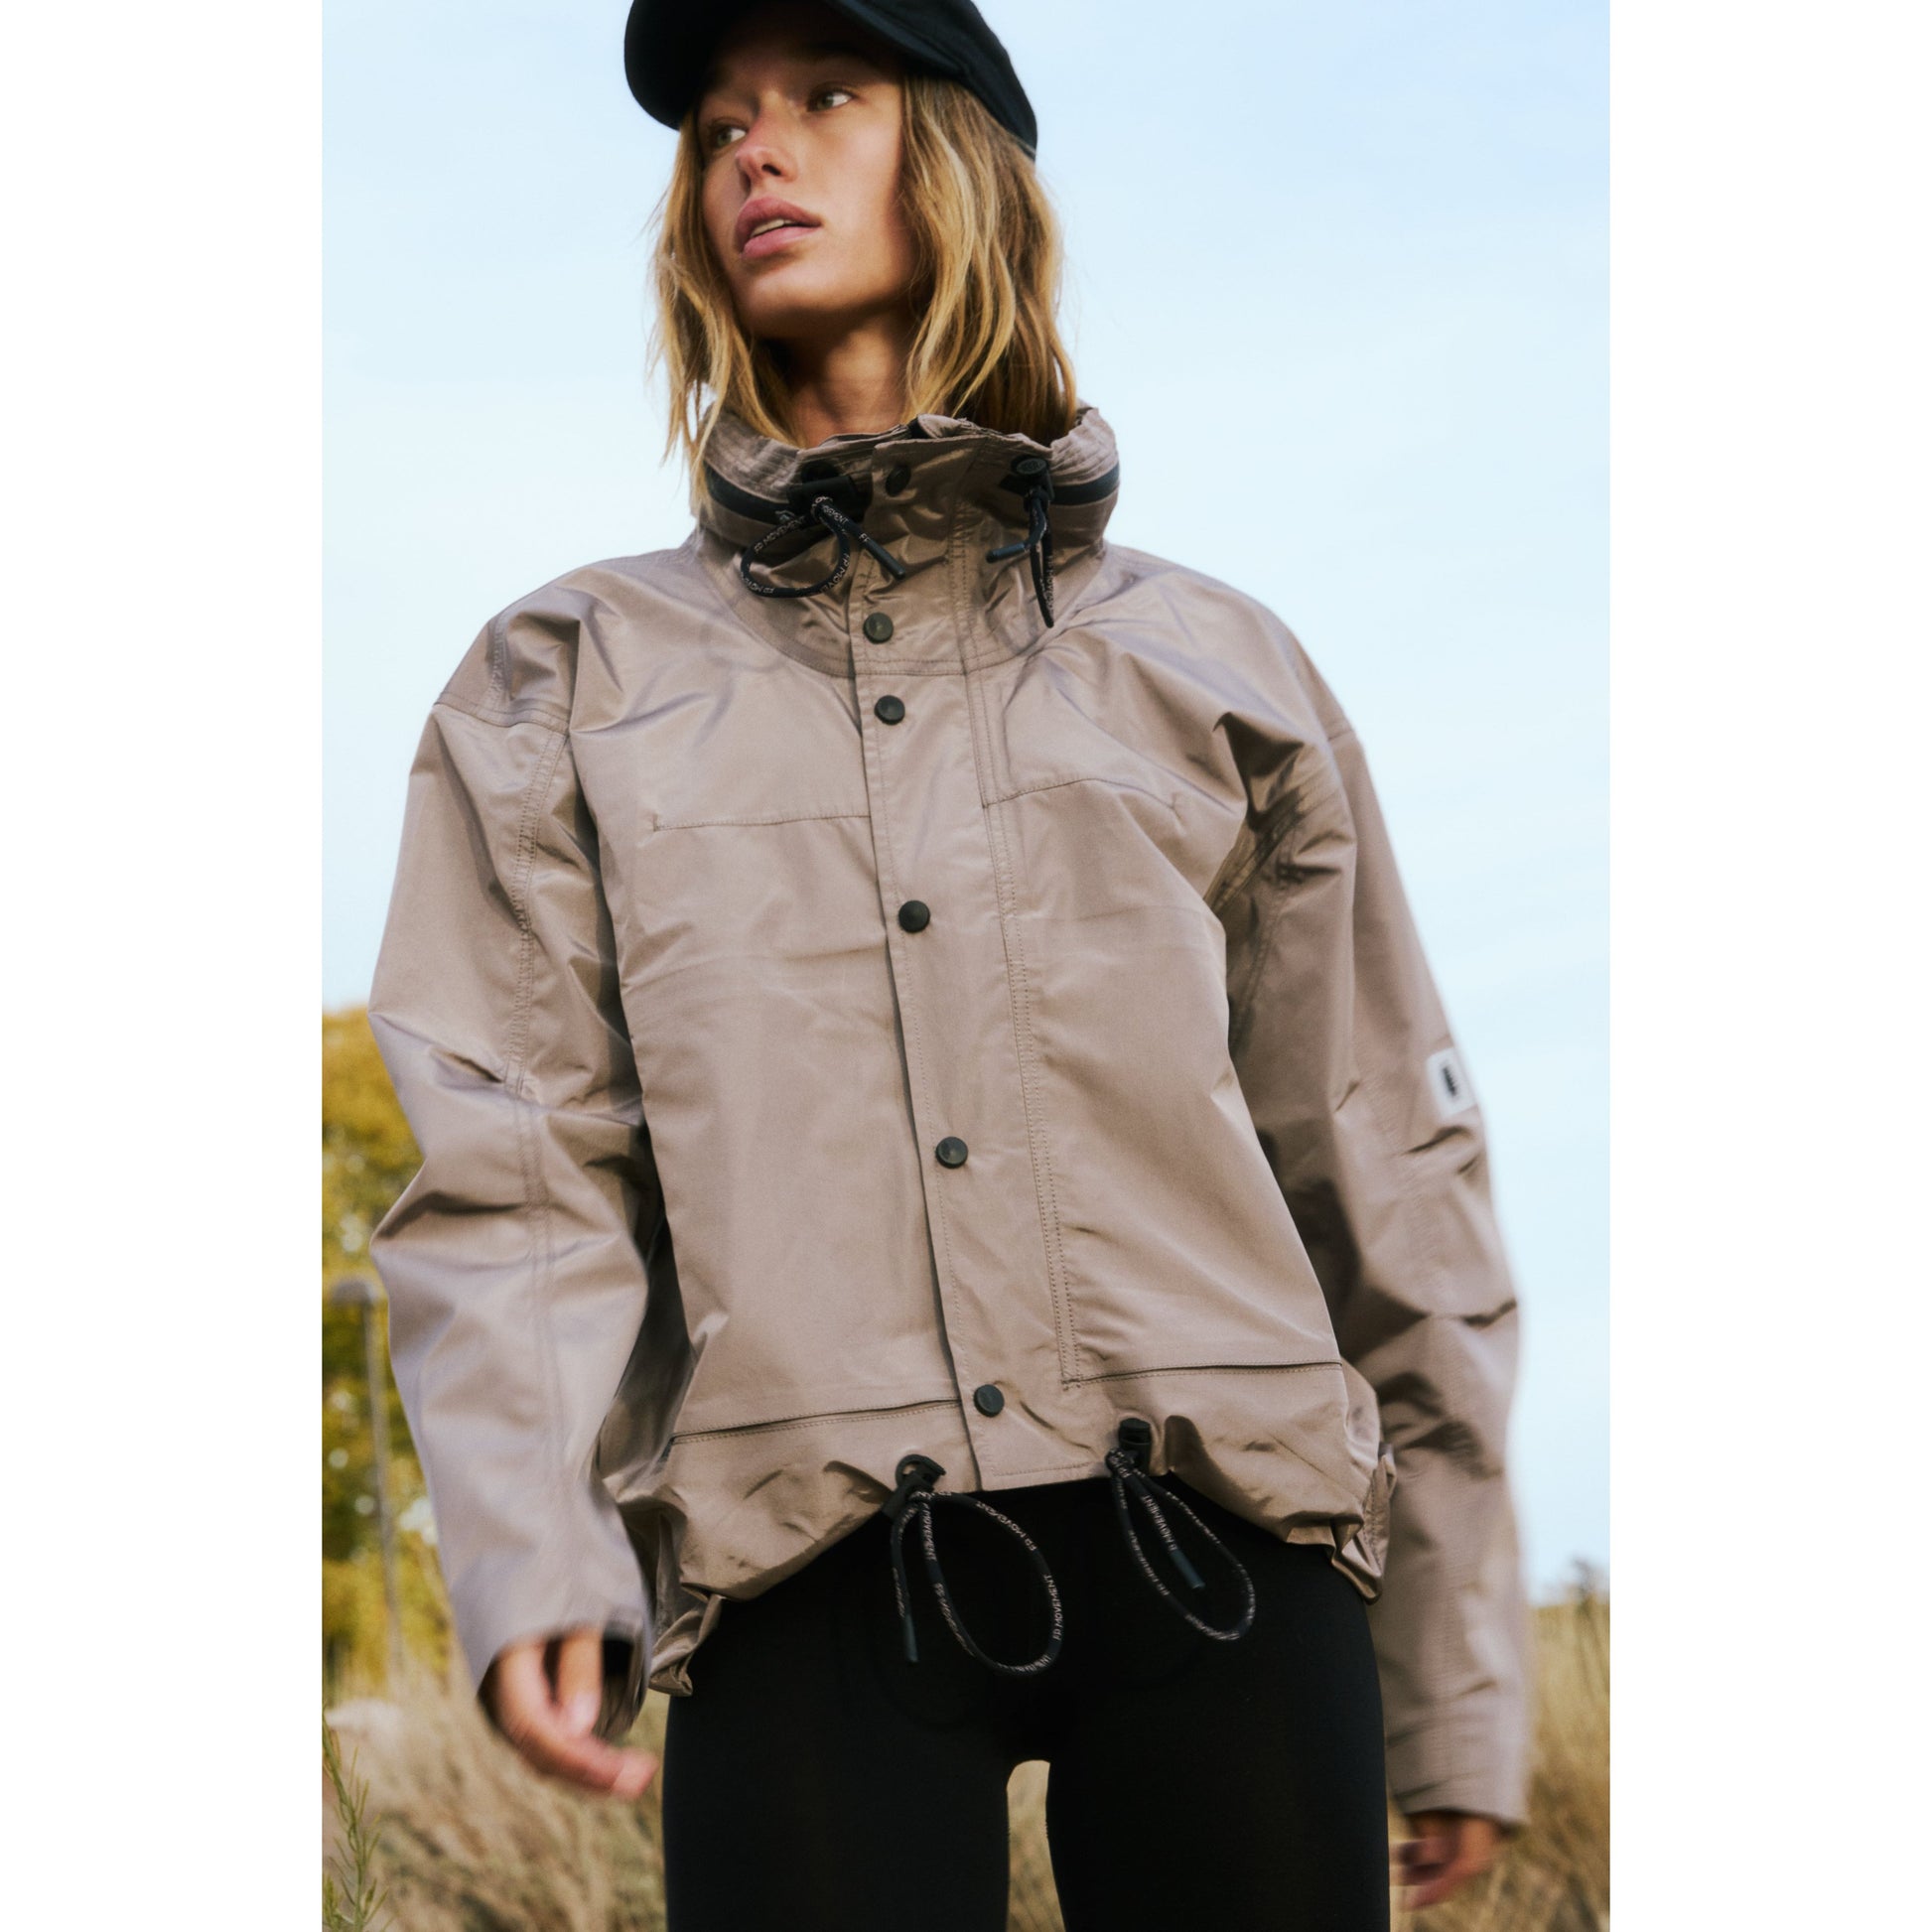 A young person wears a Rain & Shine Jacket and black pants, standing outdoors with a focused look, against a blurred natural background. Brand Name: Free People Movement